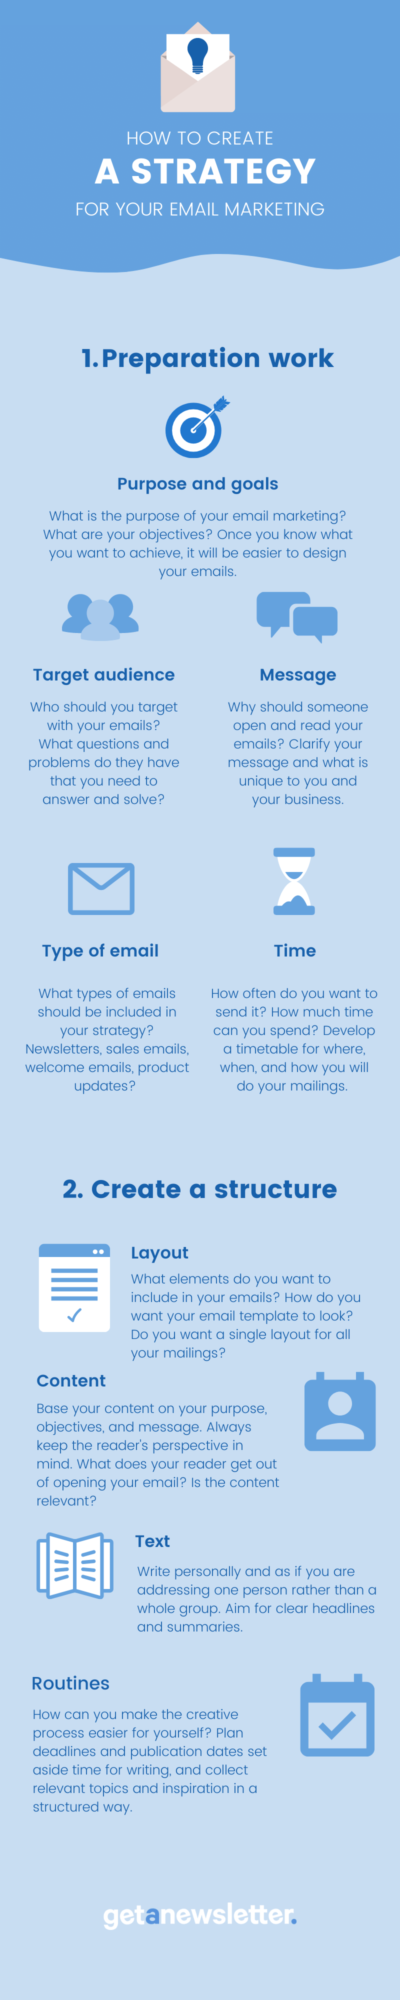 How to create an effective email marketing strategy